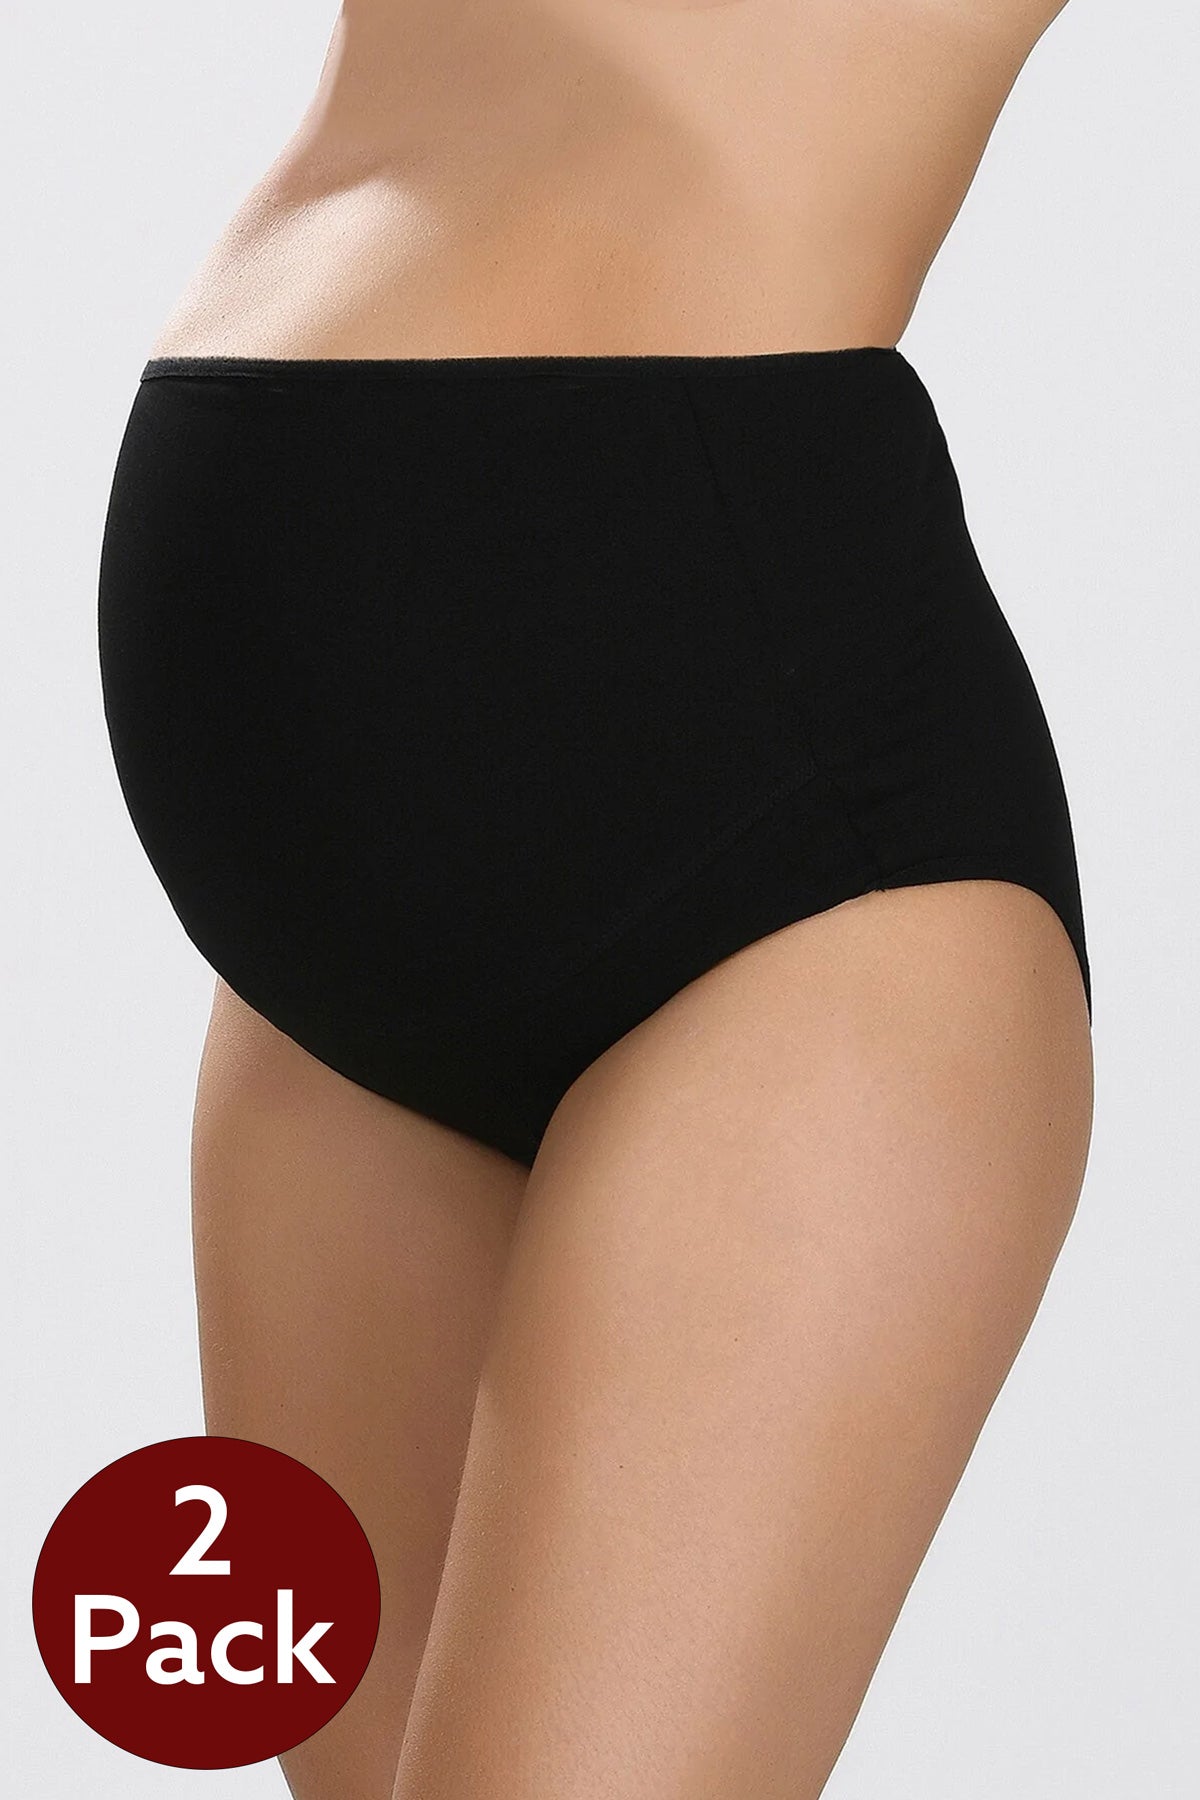 Shopymommy - 2-Pack Cotton Maternity Panties Black - 540